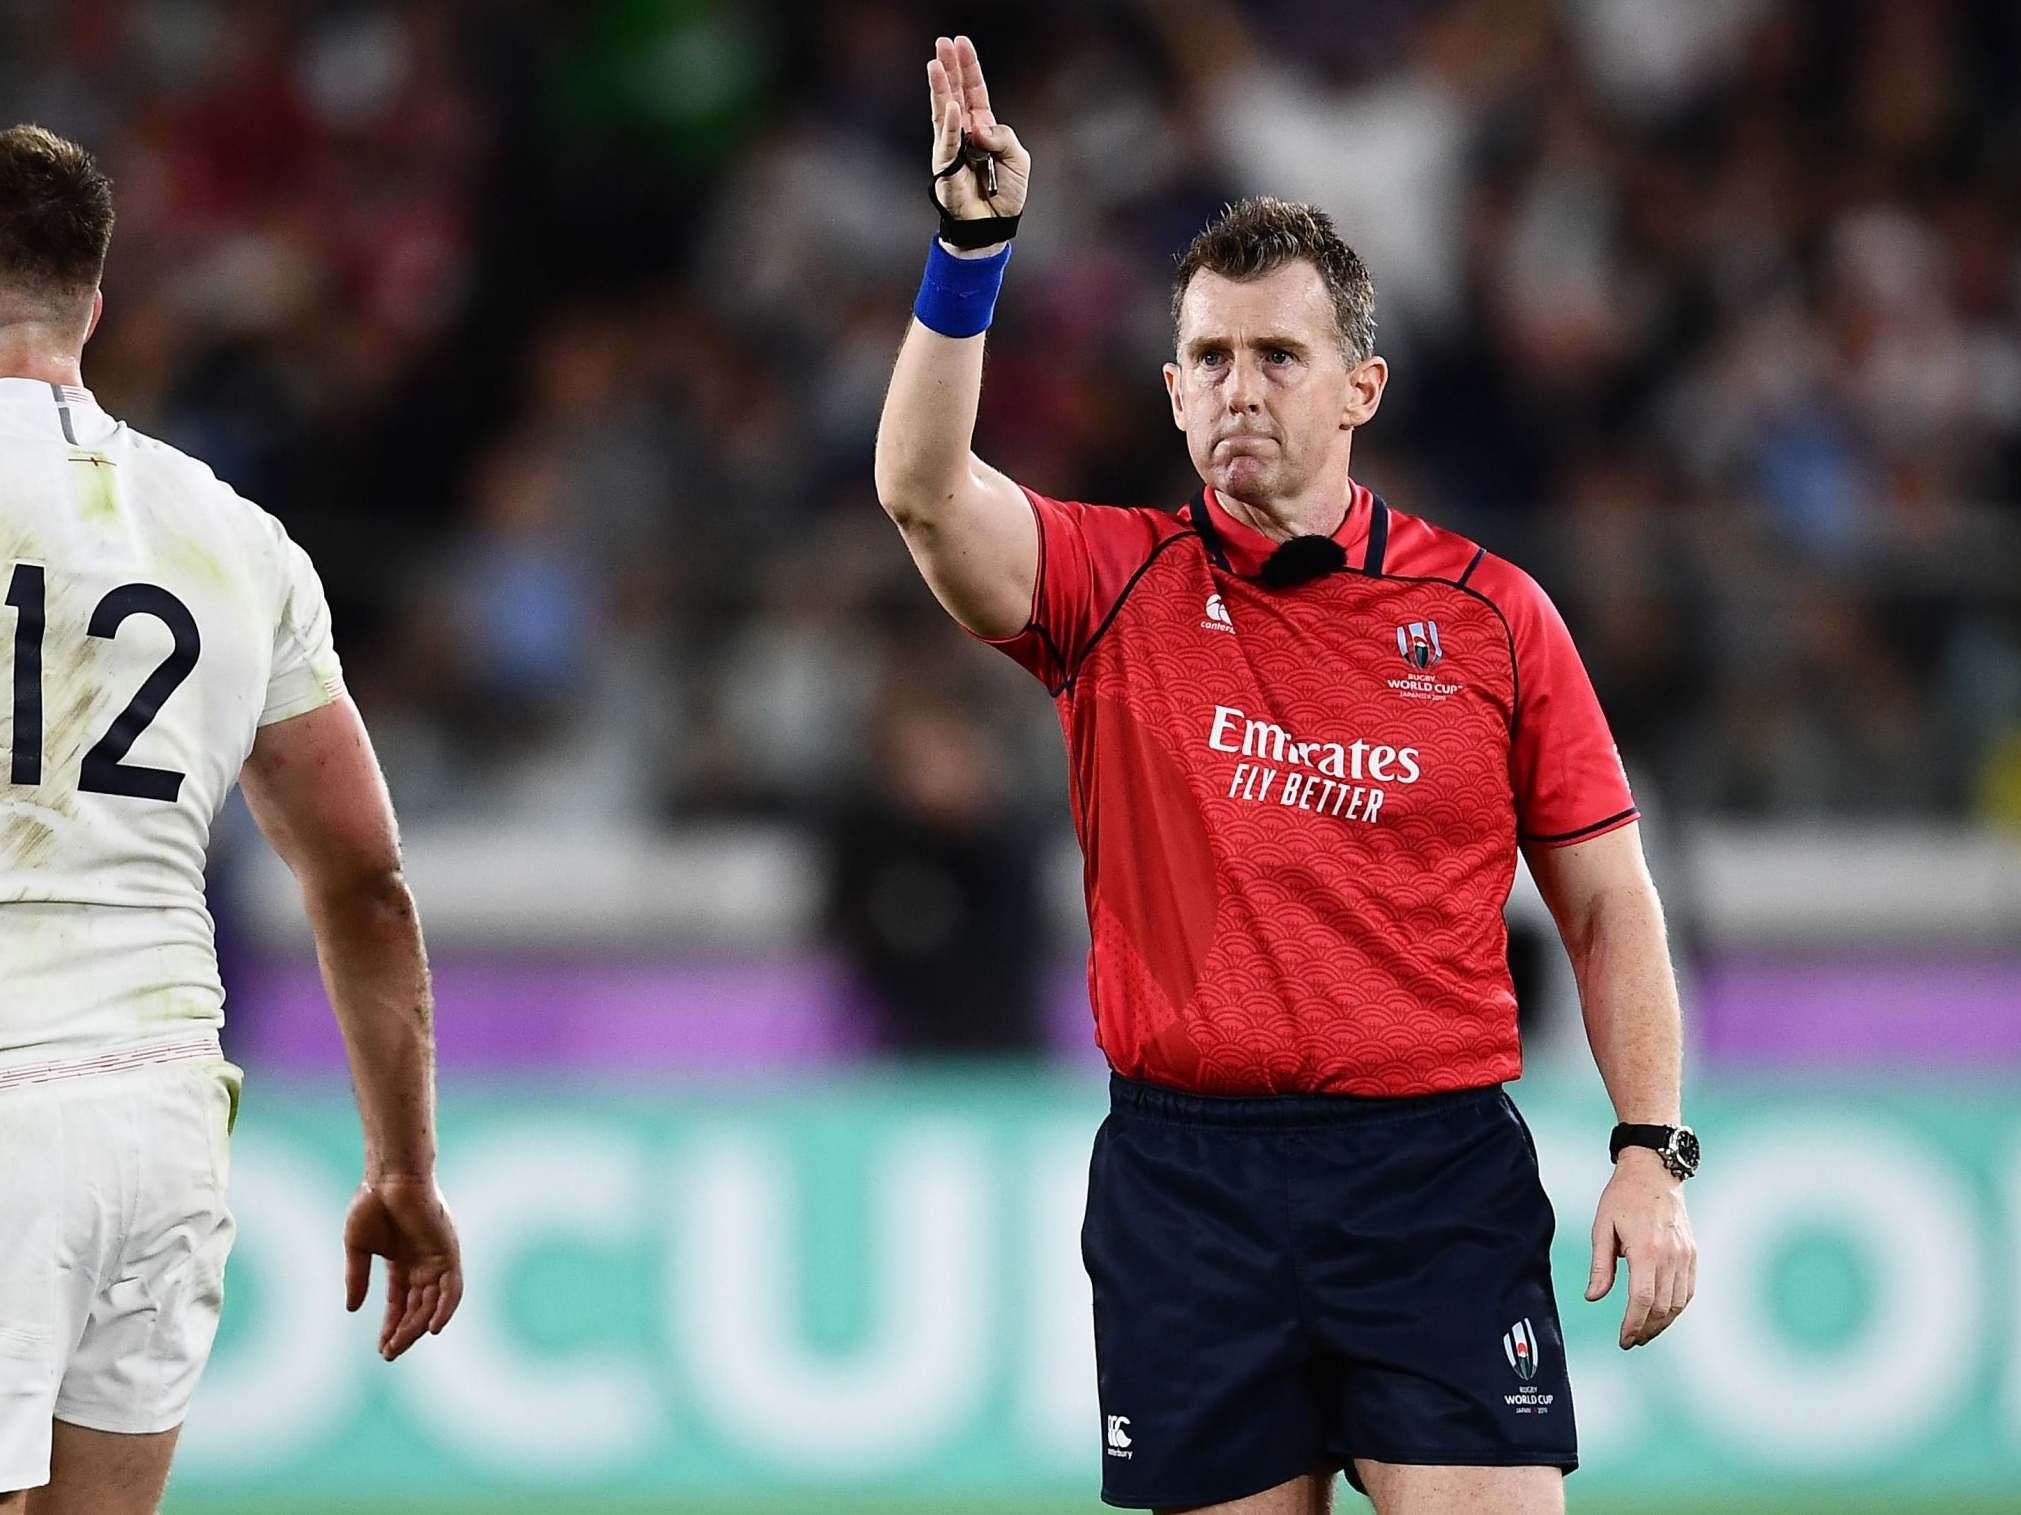 Rugby World Cup 2019 final: Injured Nigel Owens would not have refereed England vs South Africa even if fit